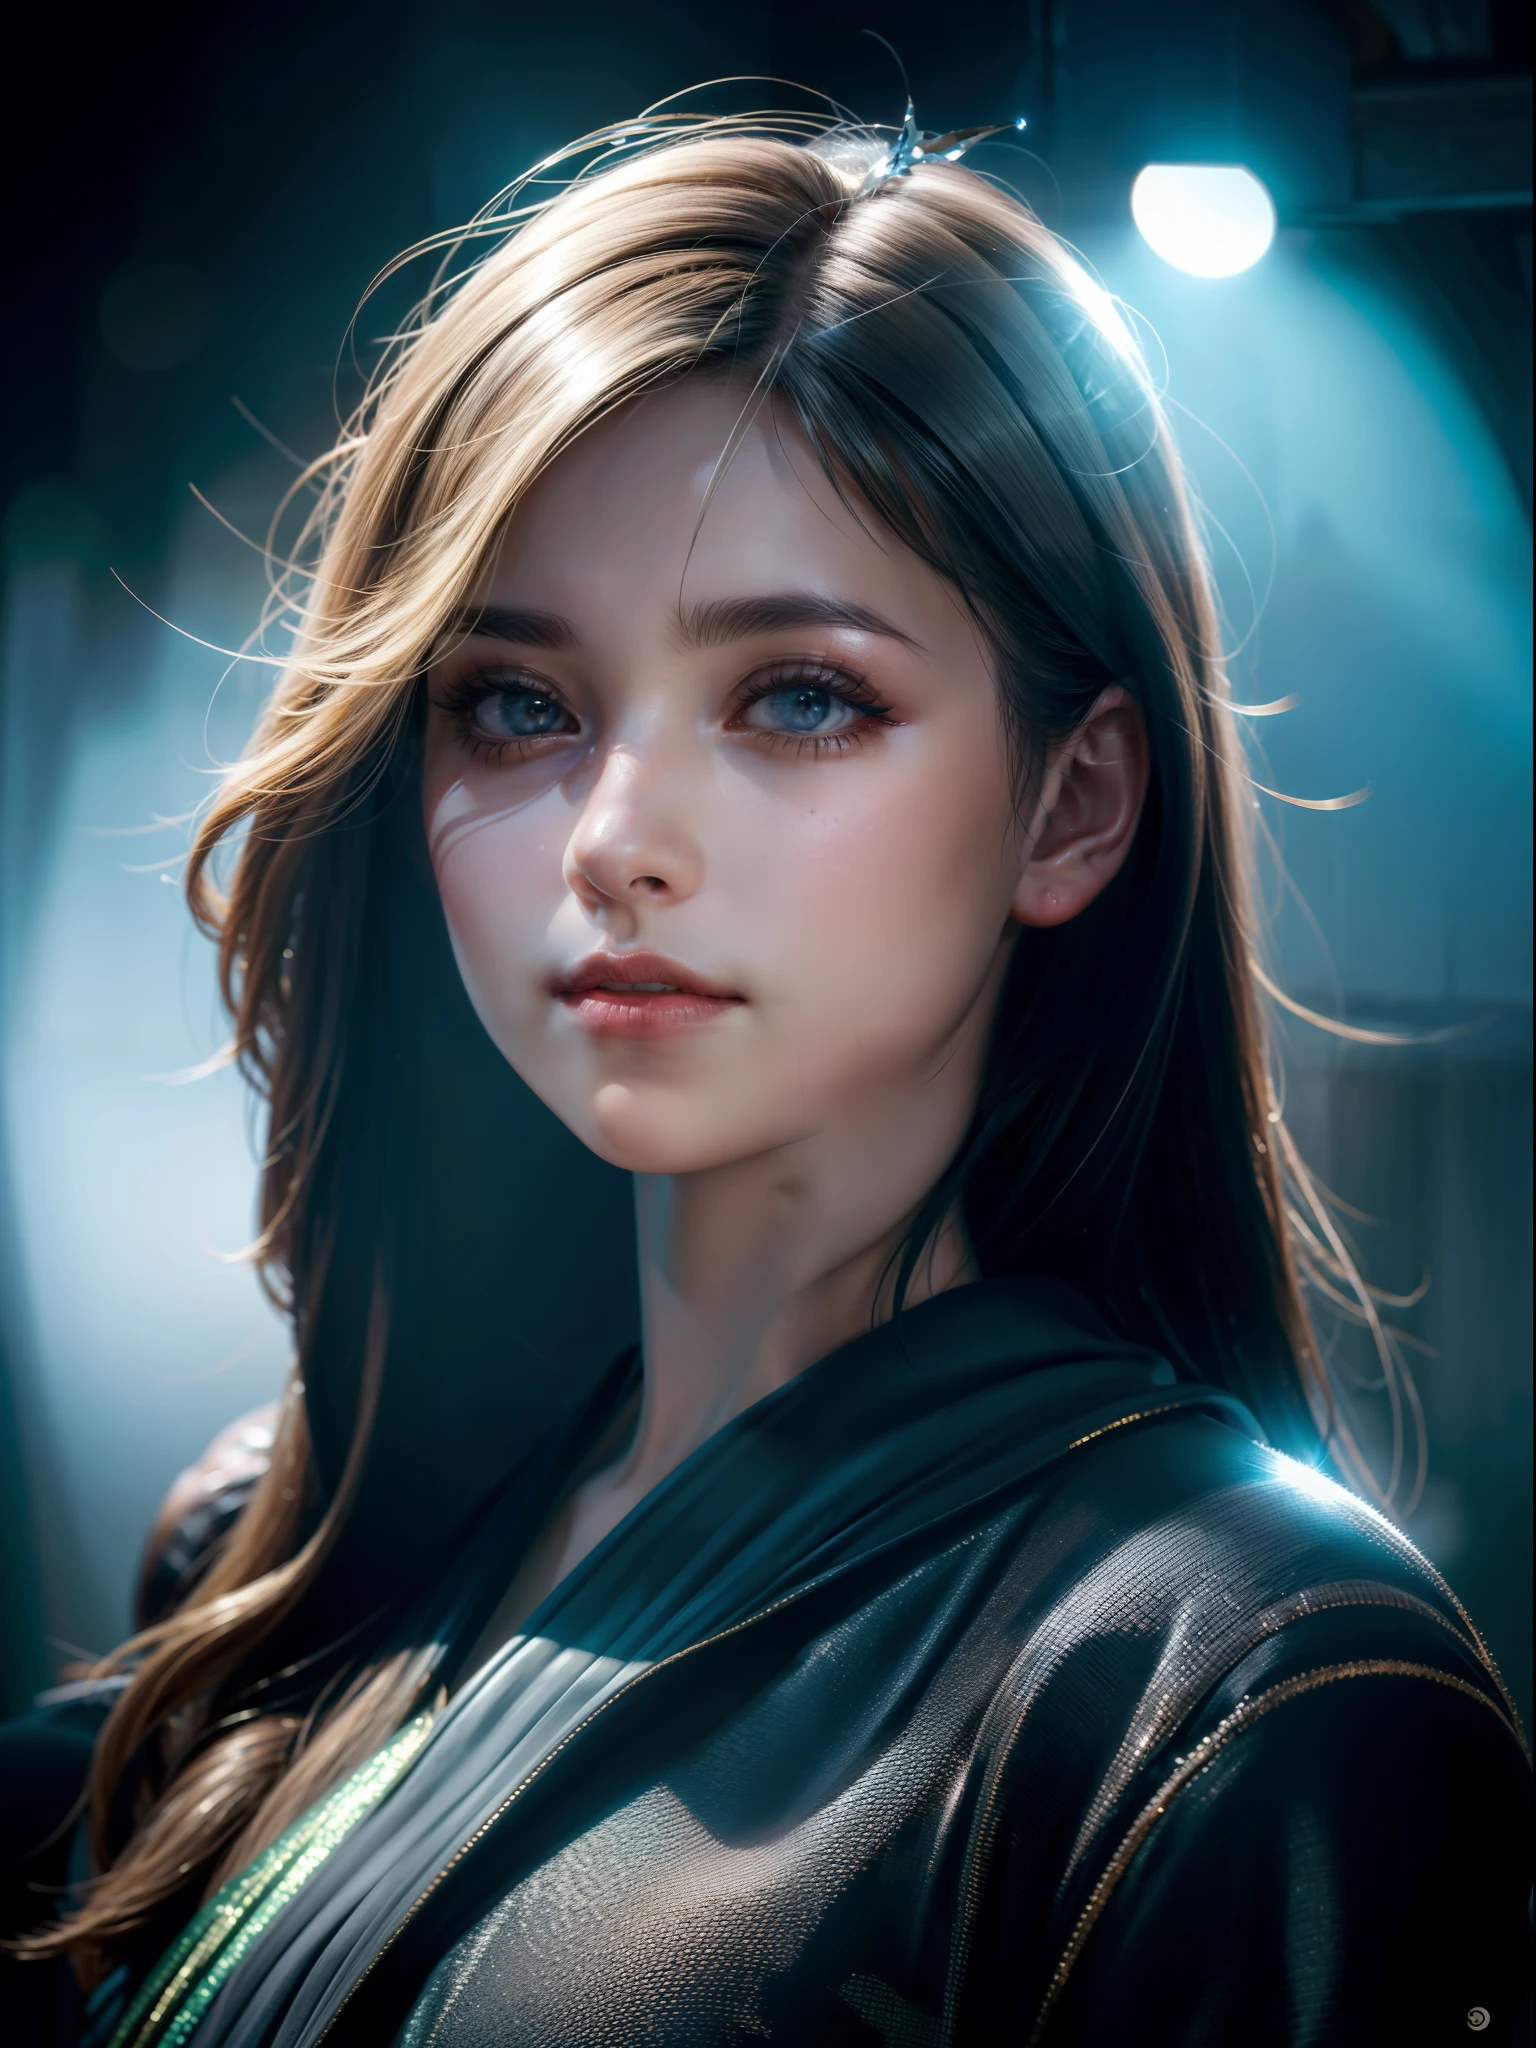 (best quality,4k,highres:1.2),ultra-detailed,realistic,photorealistic:1.37,A girl in a dark and moody setting,portrait blurred background,metallic outfit,shot with Sony Alpha 7 DSLR,beautiful detailed eyes,beautiful detailed lips, smiley expressive face,long eyelashes,dark mysterious atmosphere,high contrast,mysterious mist,subtle hints of fog,lens flare,chromatic aberration,rich and vibrant colors,dramatic pose with a slight tilt of the head,focus on the girl's face,subtle bokeh effects